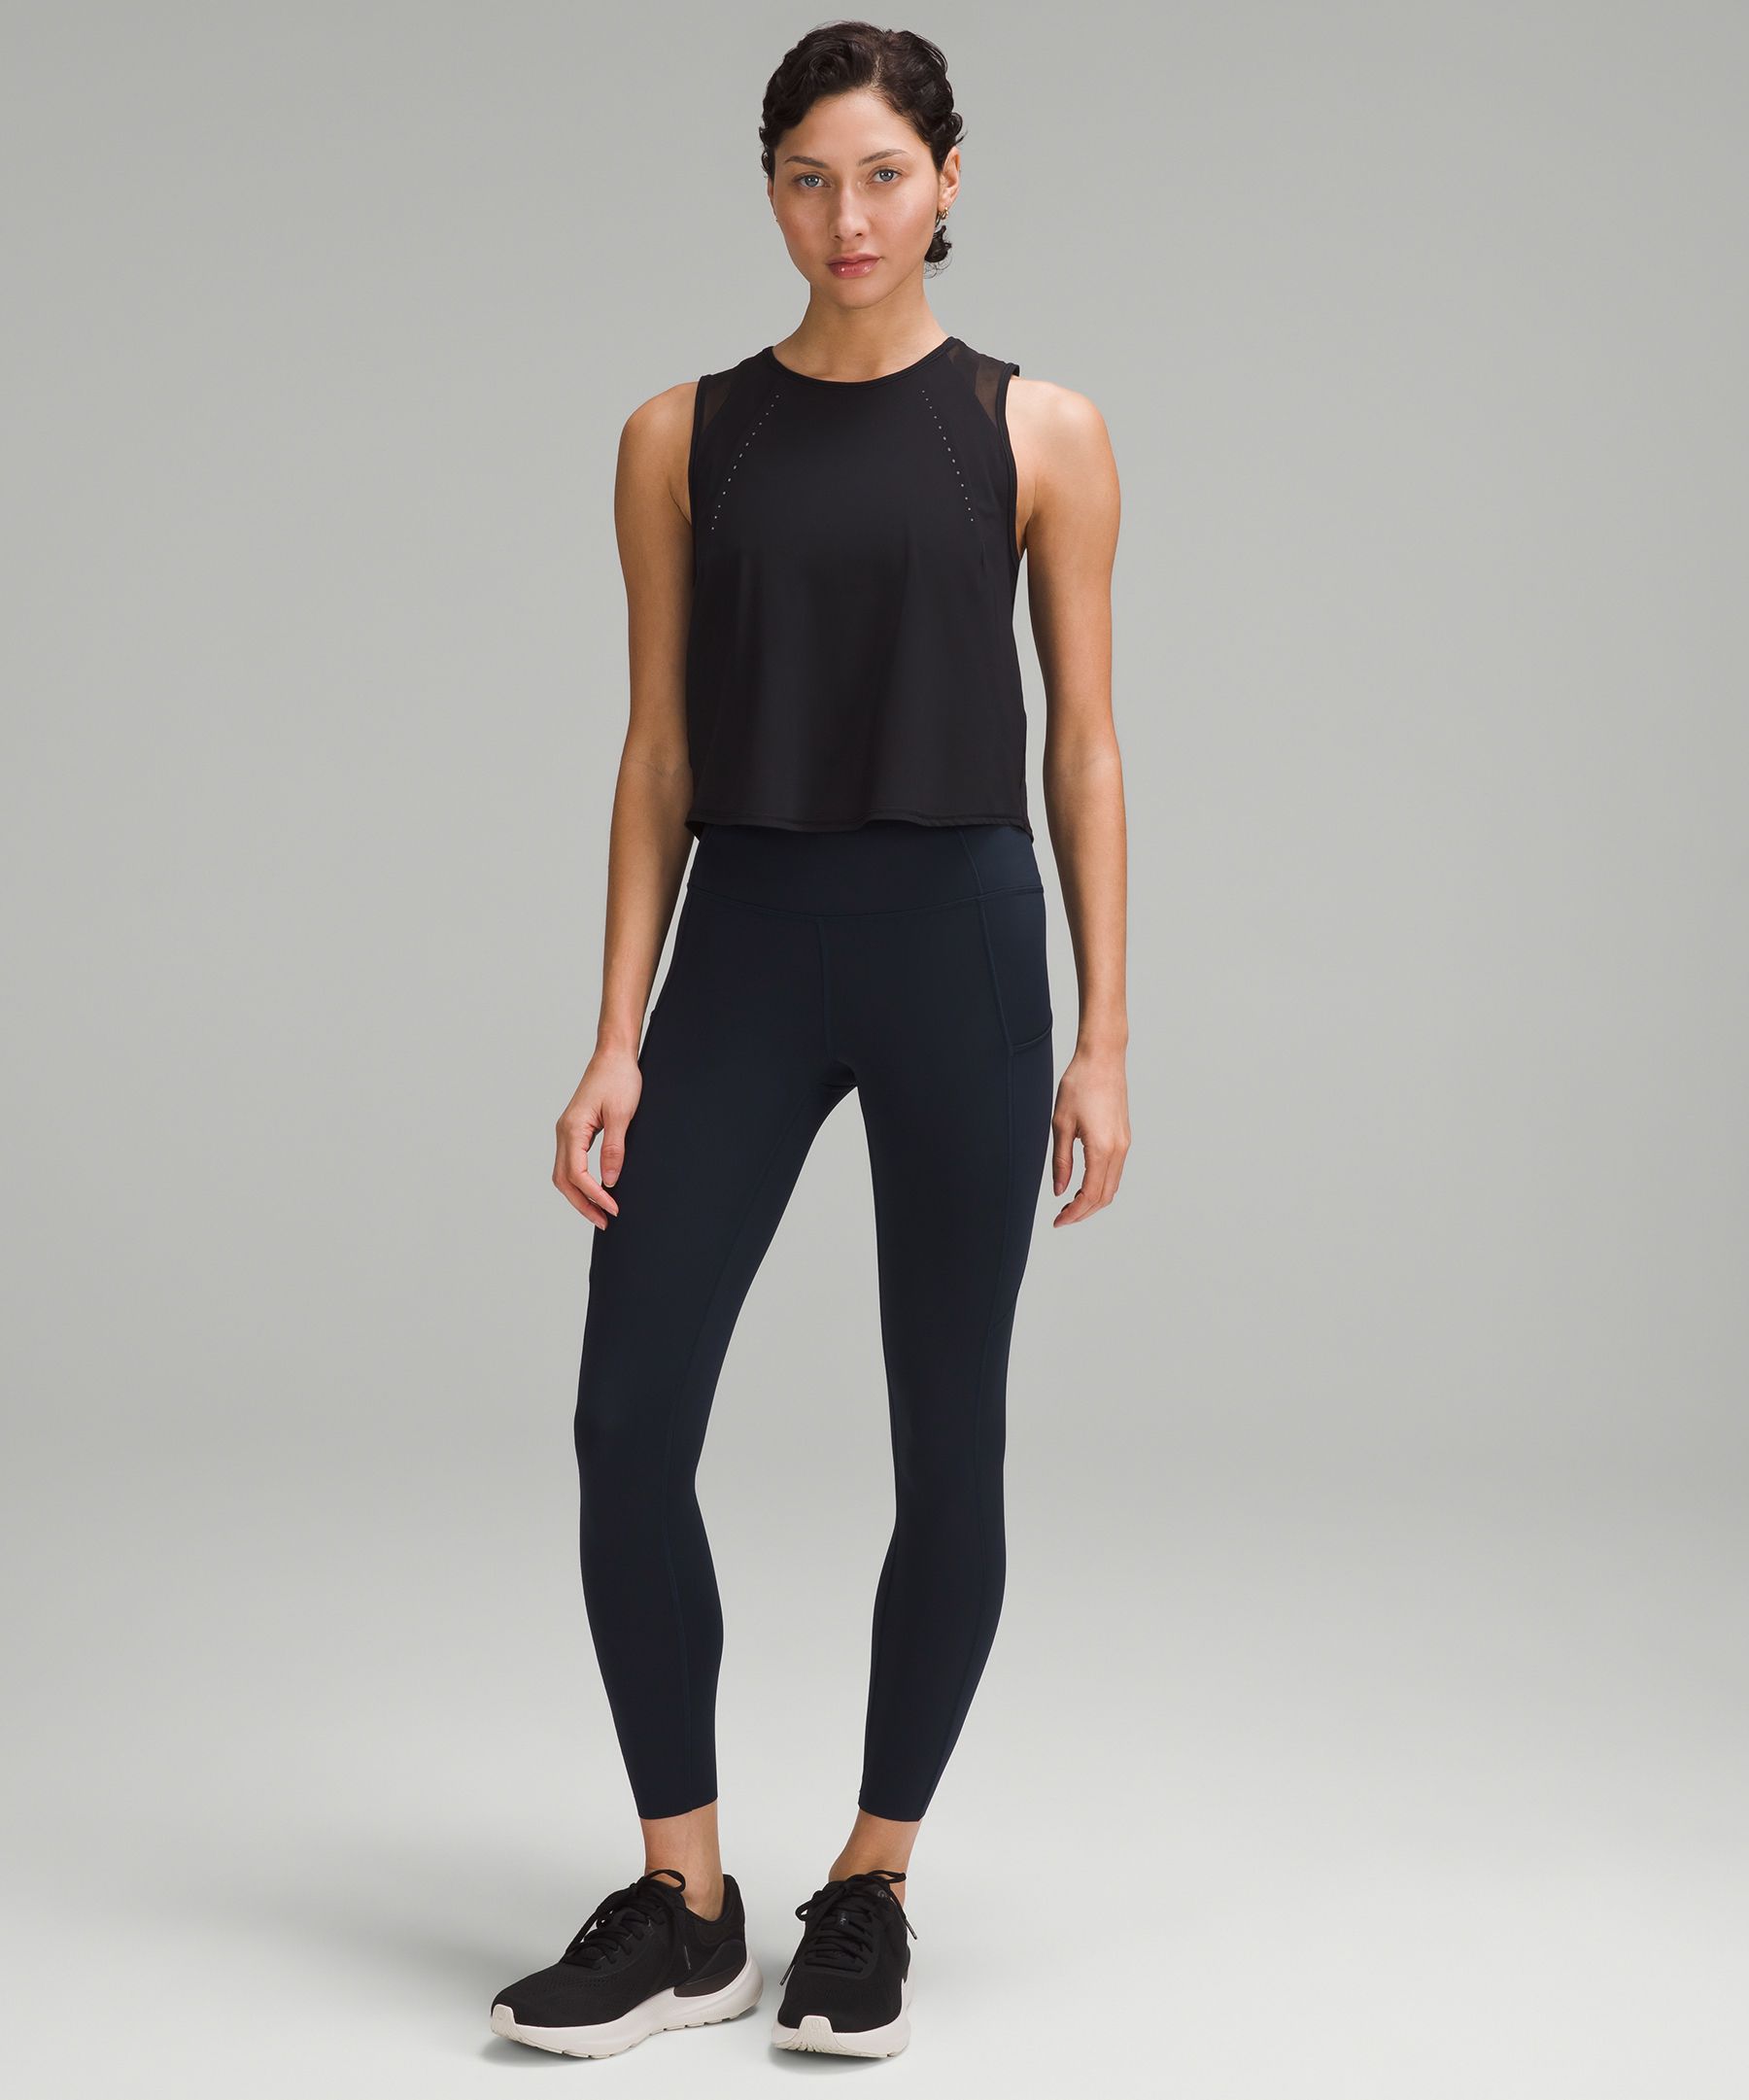 Lululemon Asia Fit Fast And Free